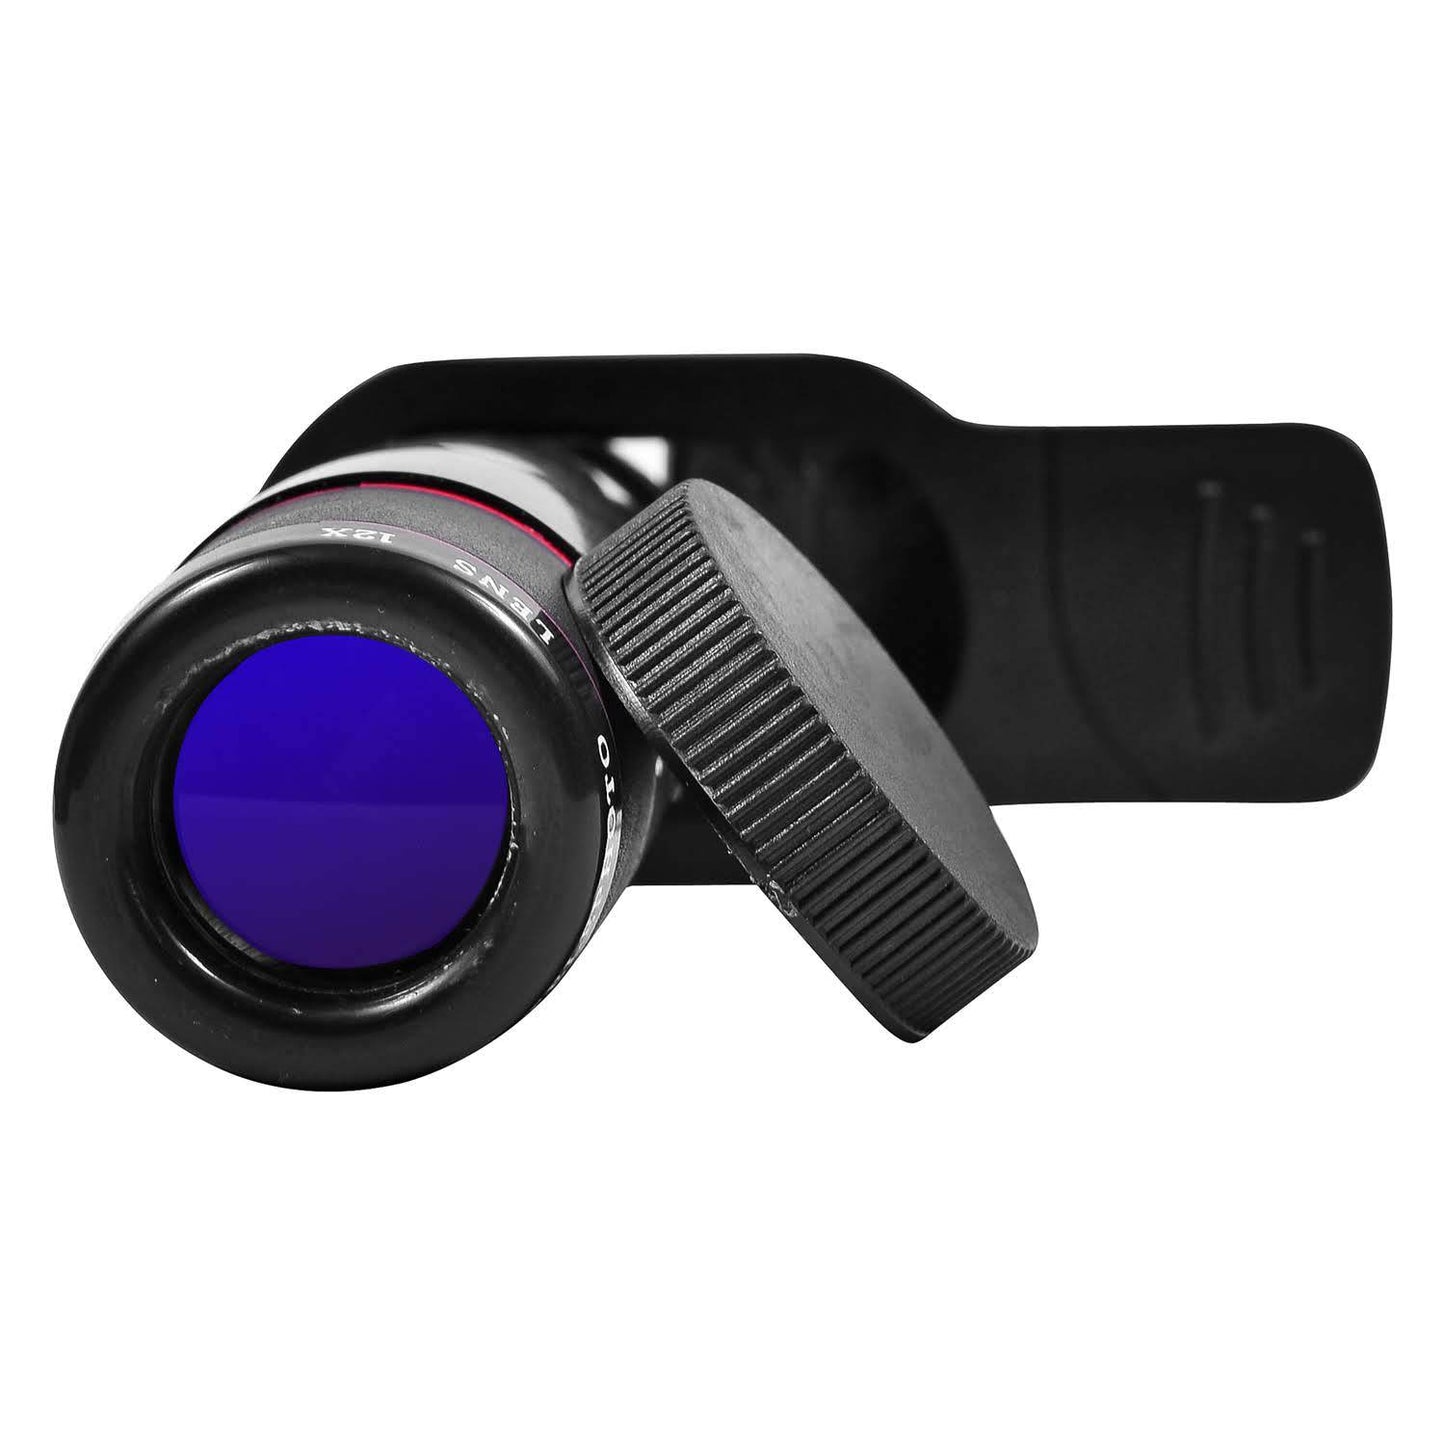 12x zoom lens for mobile-best cell phone telephoto lens for android and iphone